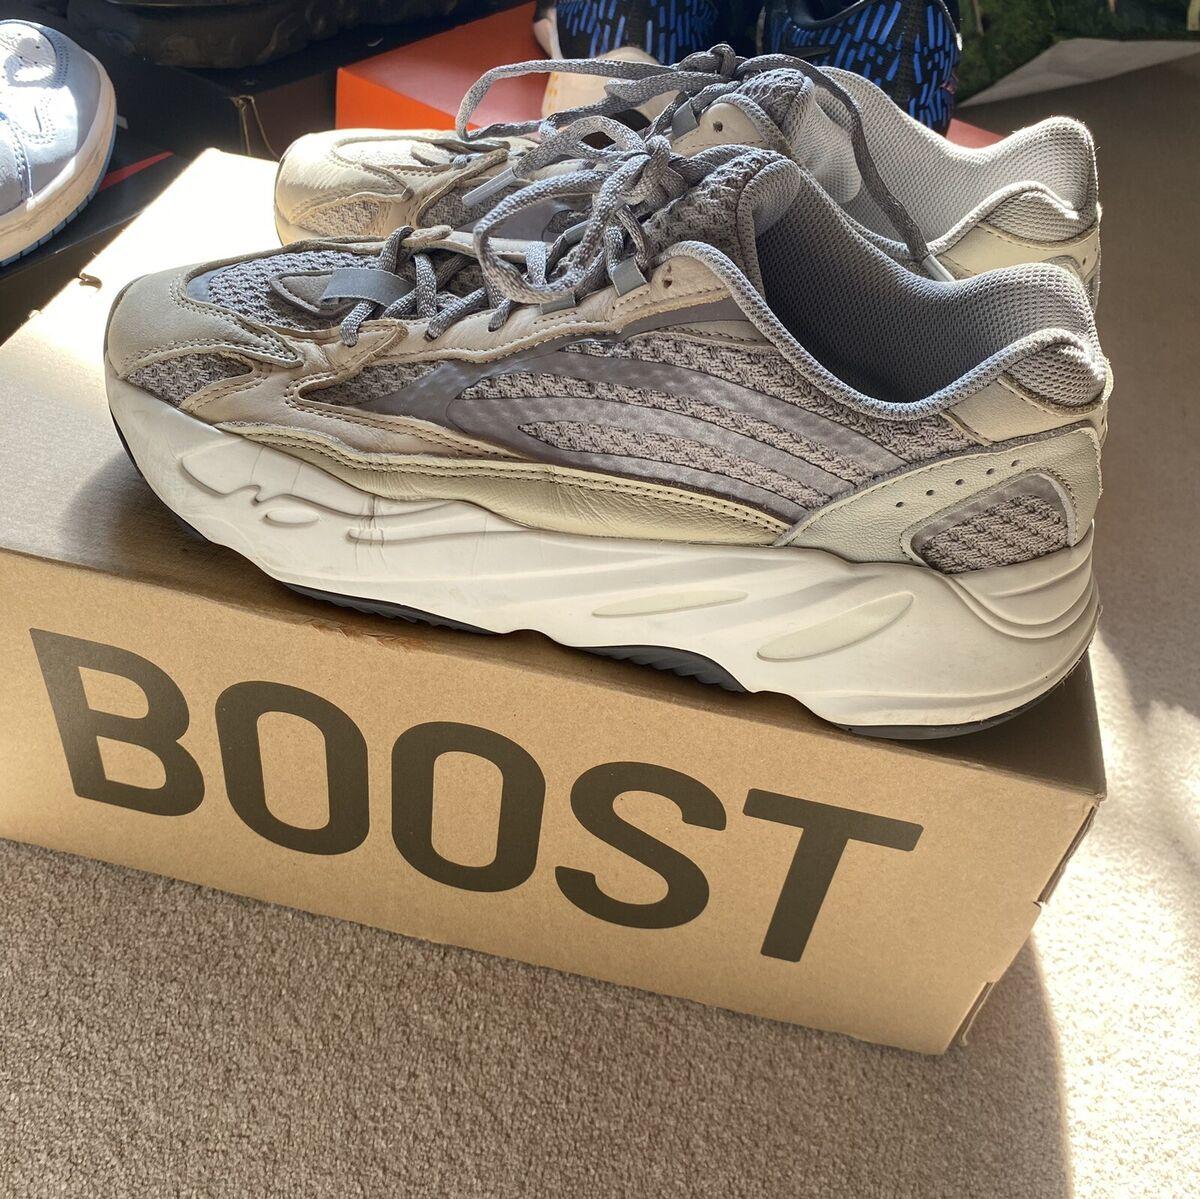 🔥 Free download Adidas Yeezy Boost V2 Cream colour UK size USED eBay ...